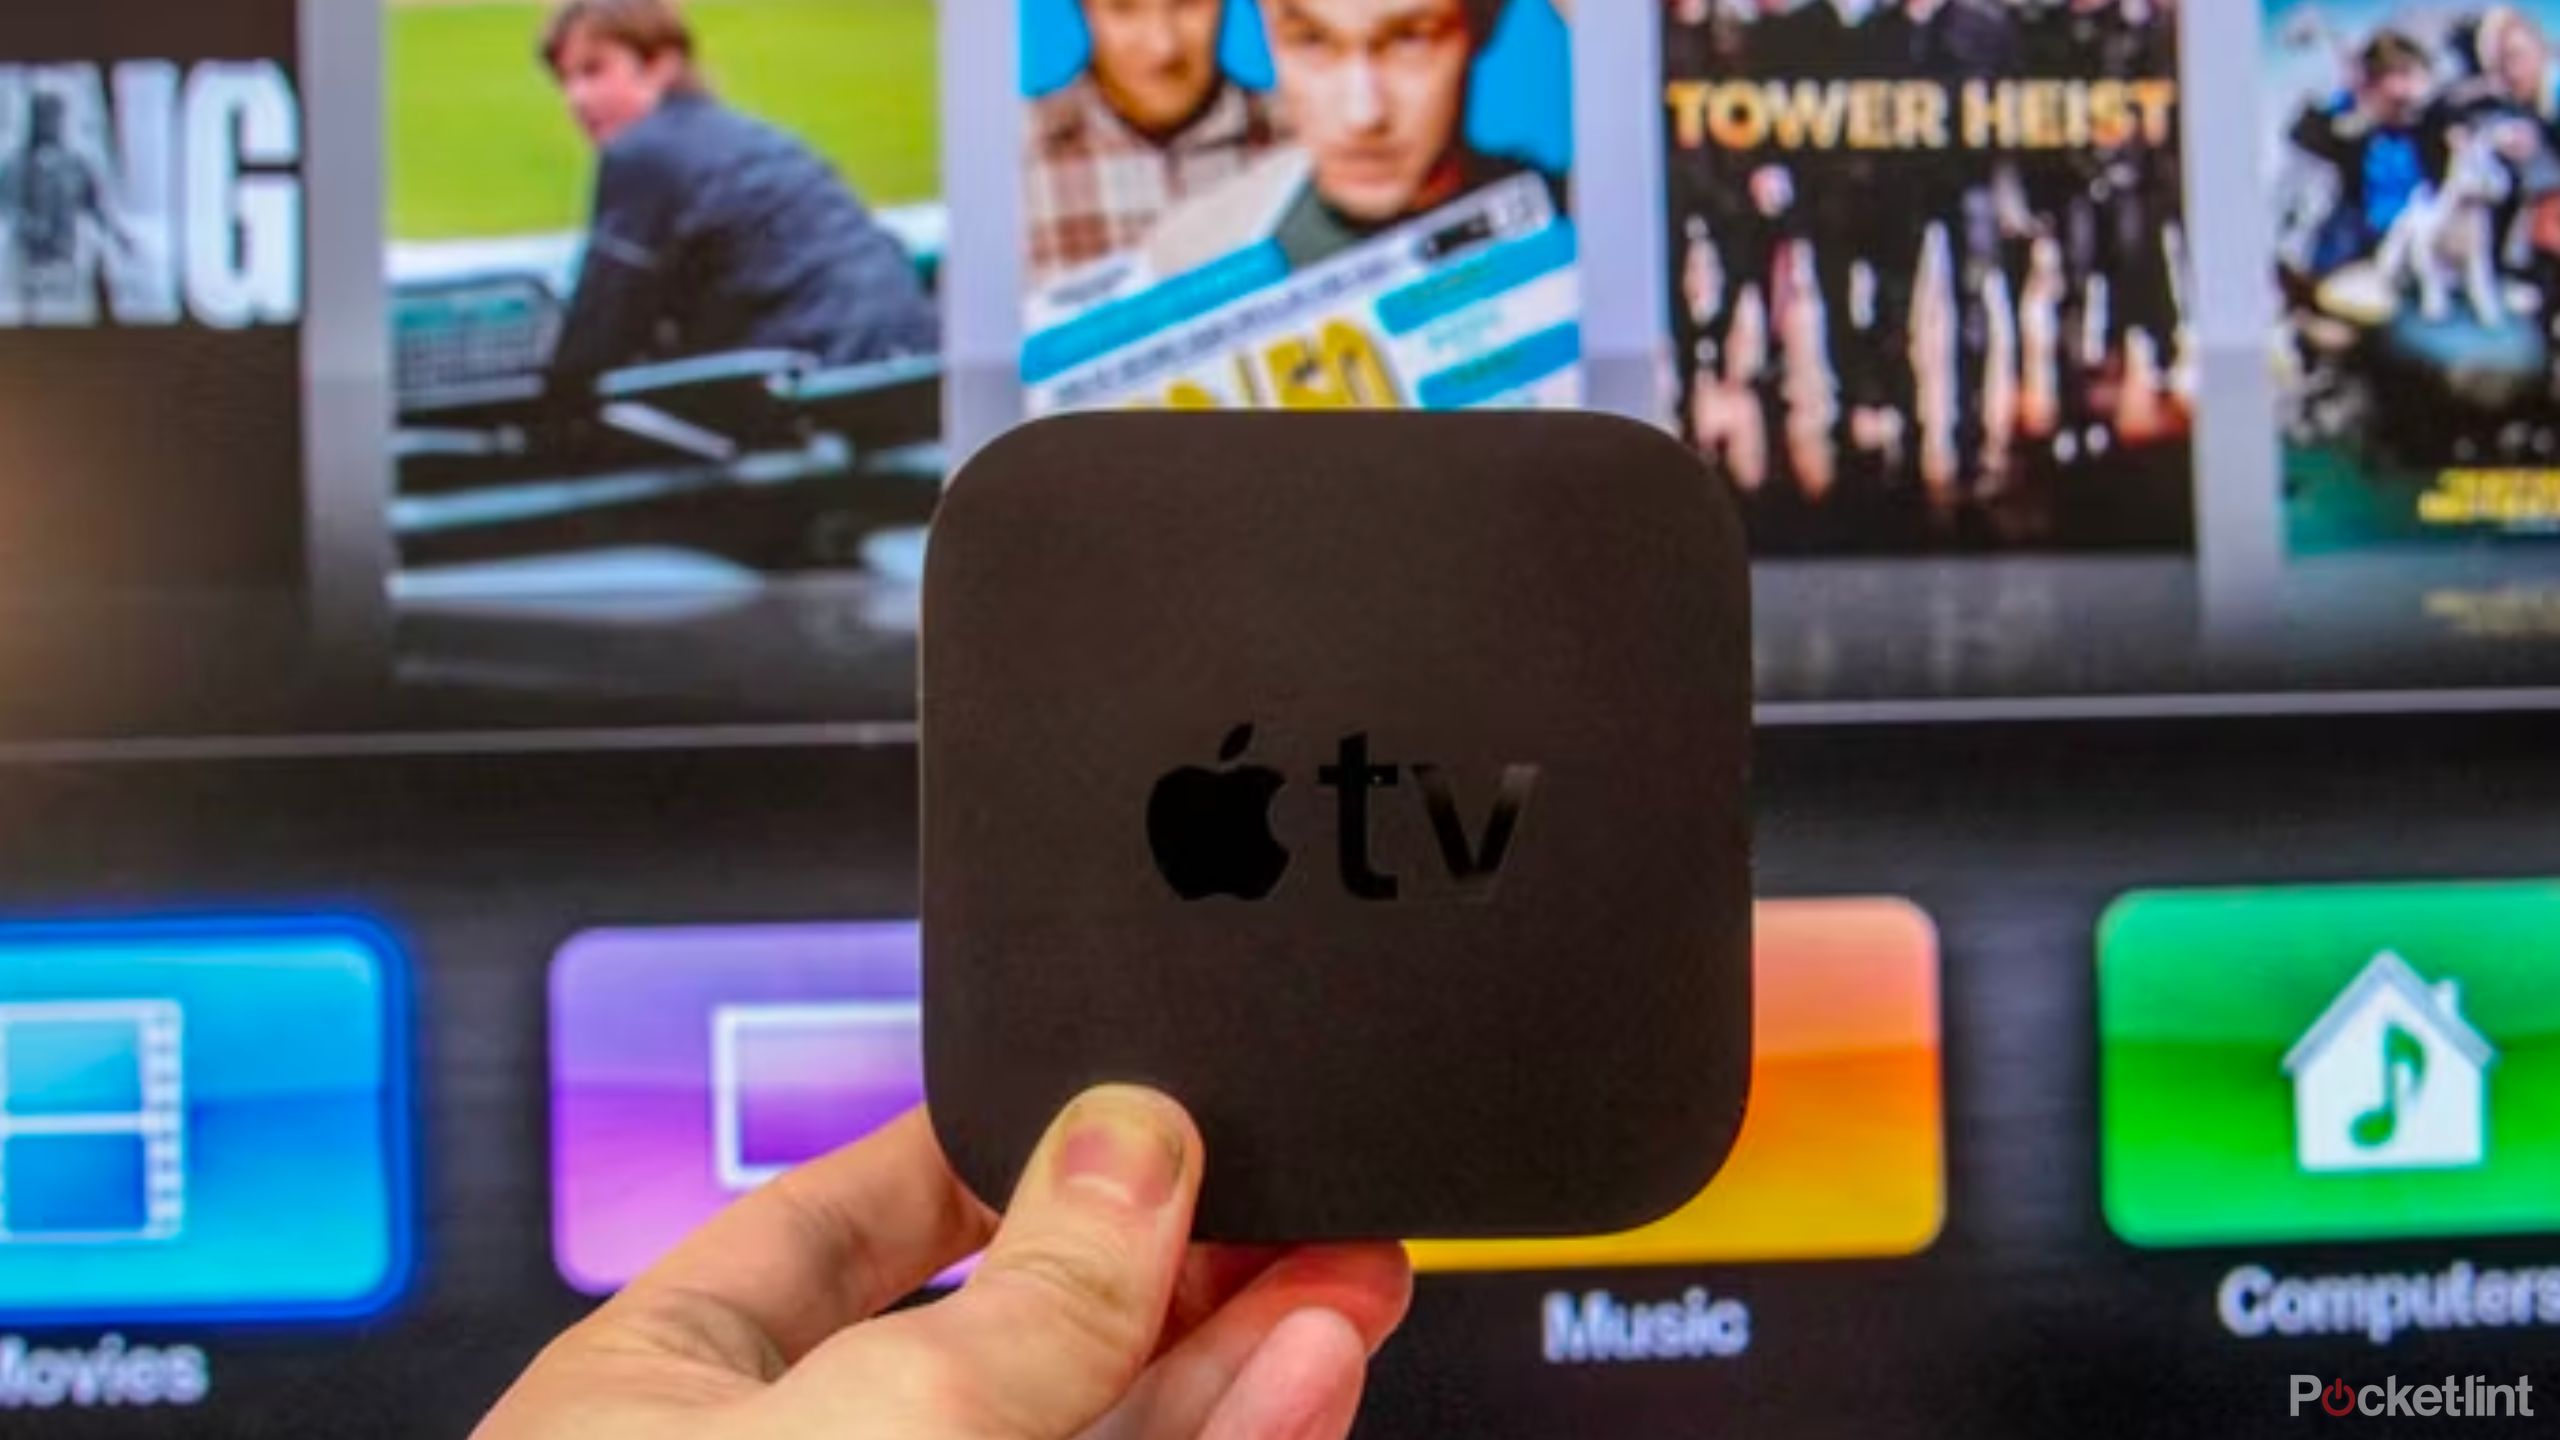 Apple TV with apps in the background